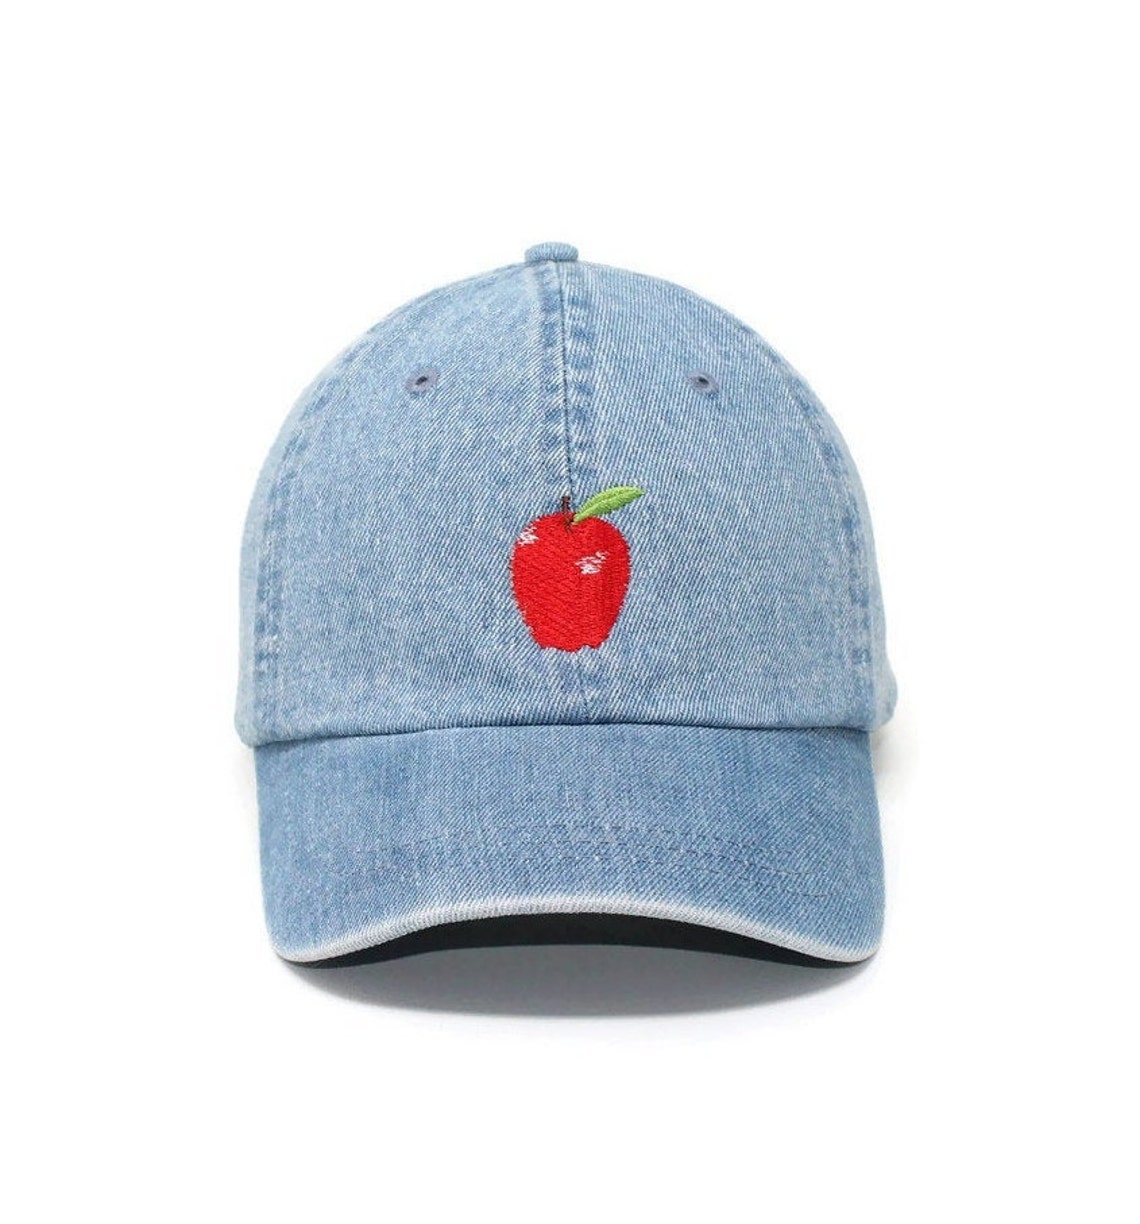 Apple Embroidered Hat Adjustable Unstructured Red Apple Dad | Etsy